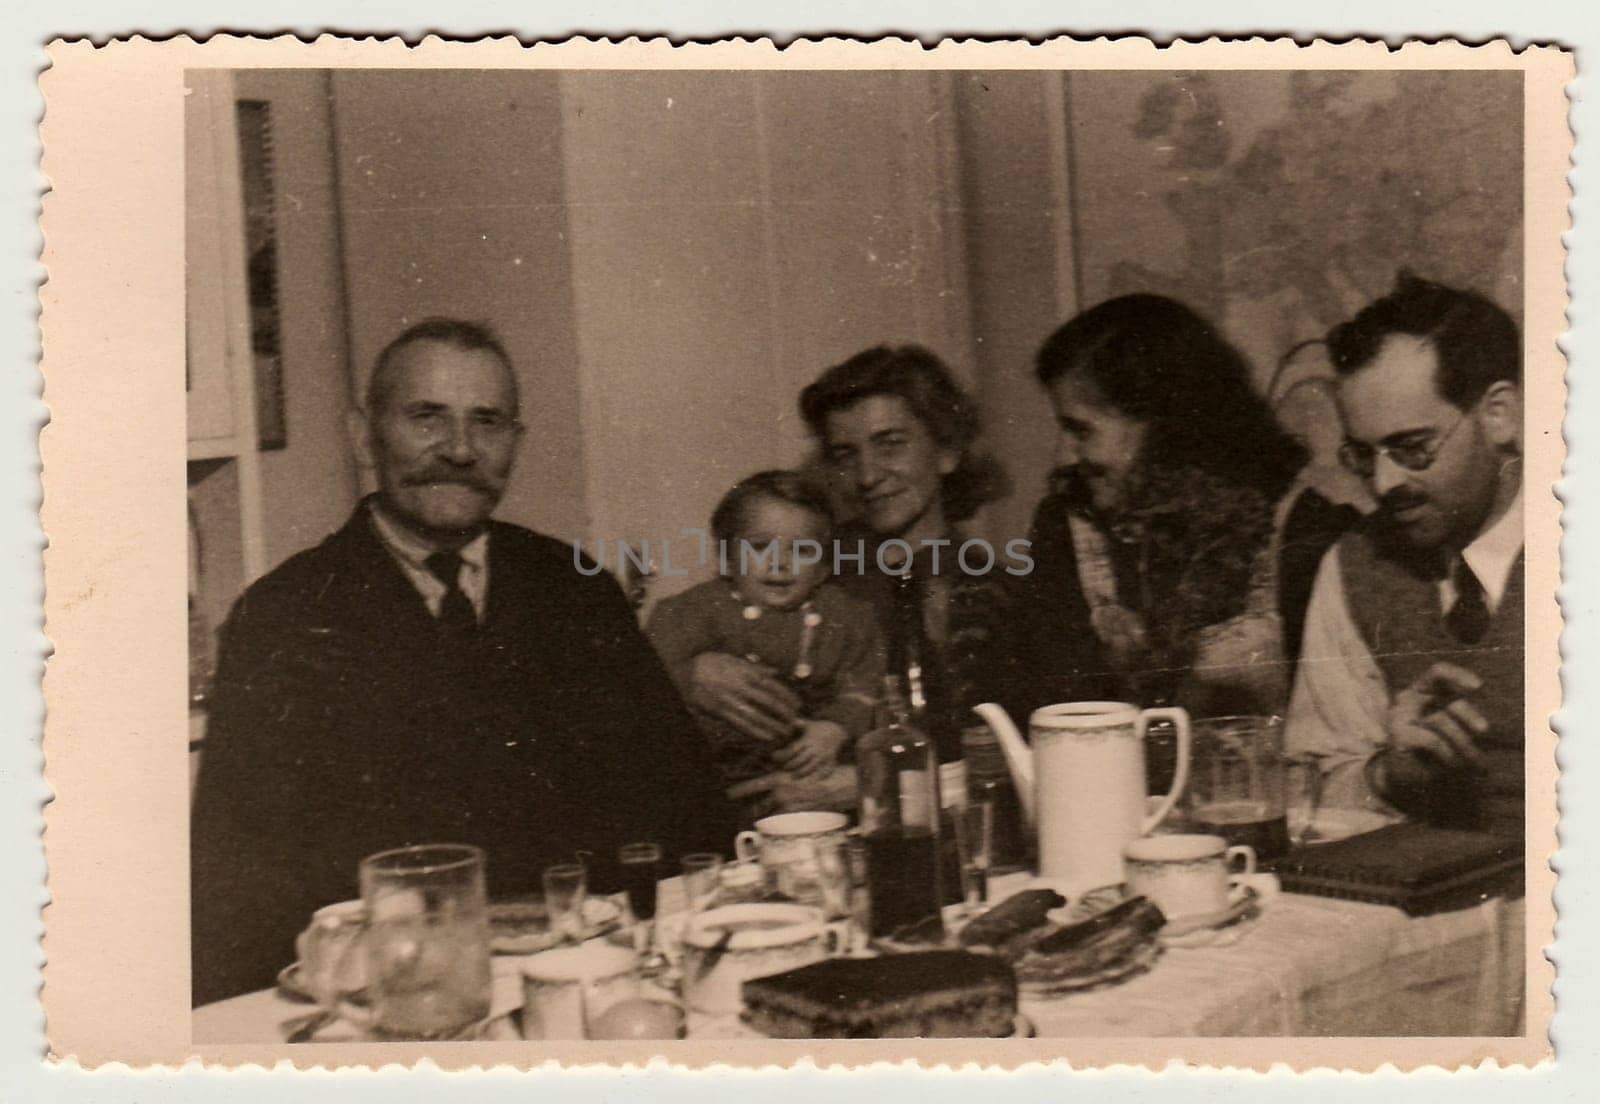 THE CZECHOSLOVAK REPUBLIC - CIRCA 1940s: Vintage photo shows family during the feast.